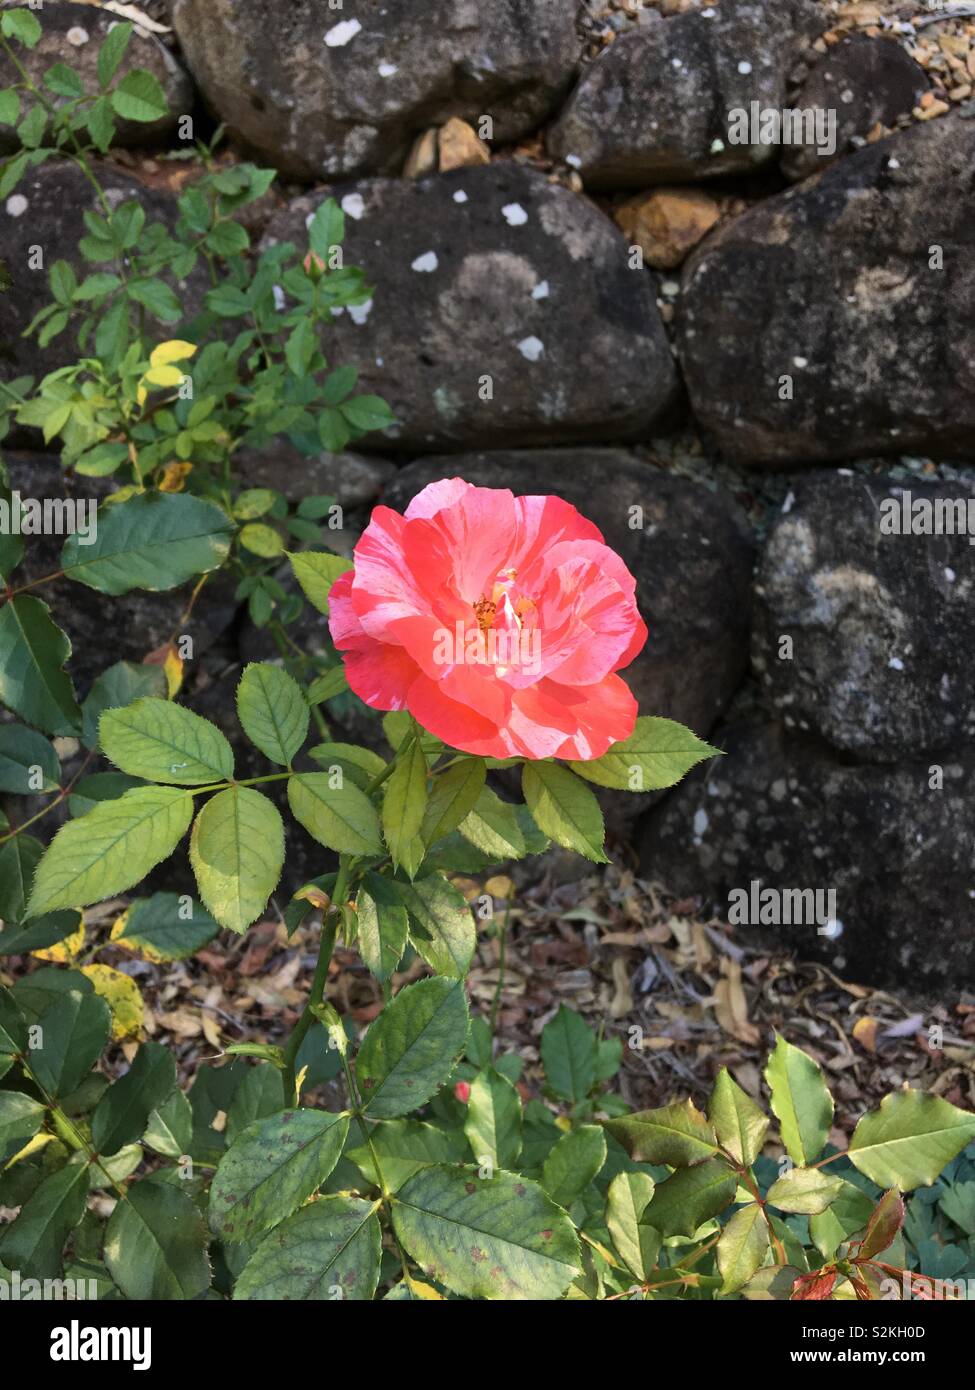 Spotted this double shaded rose in botanic garden in Mt Tamborine in Eastern Australia. Stock Photo